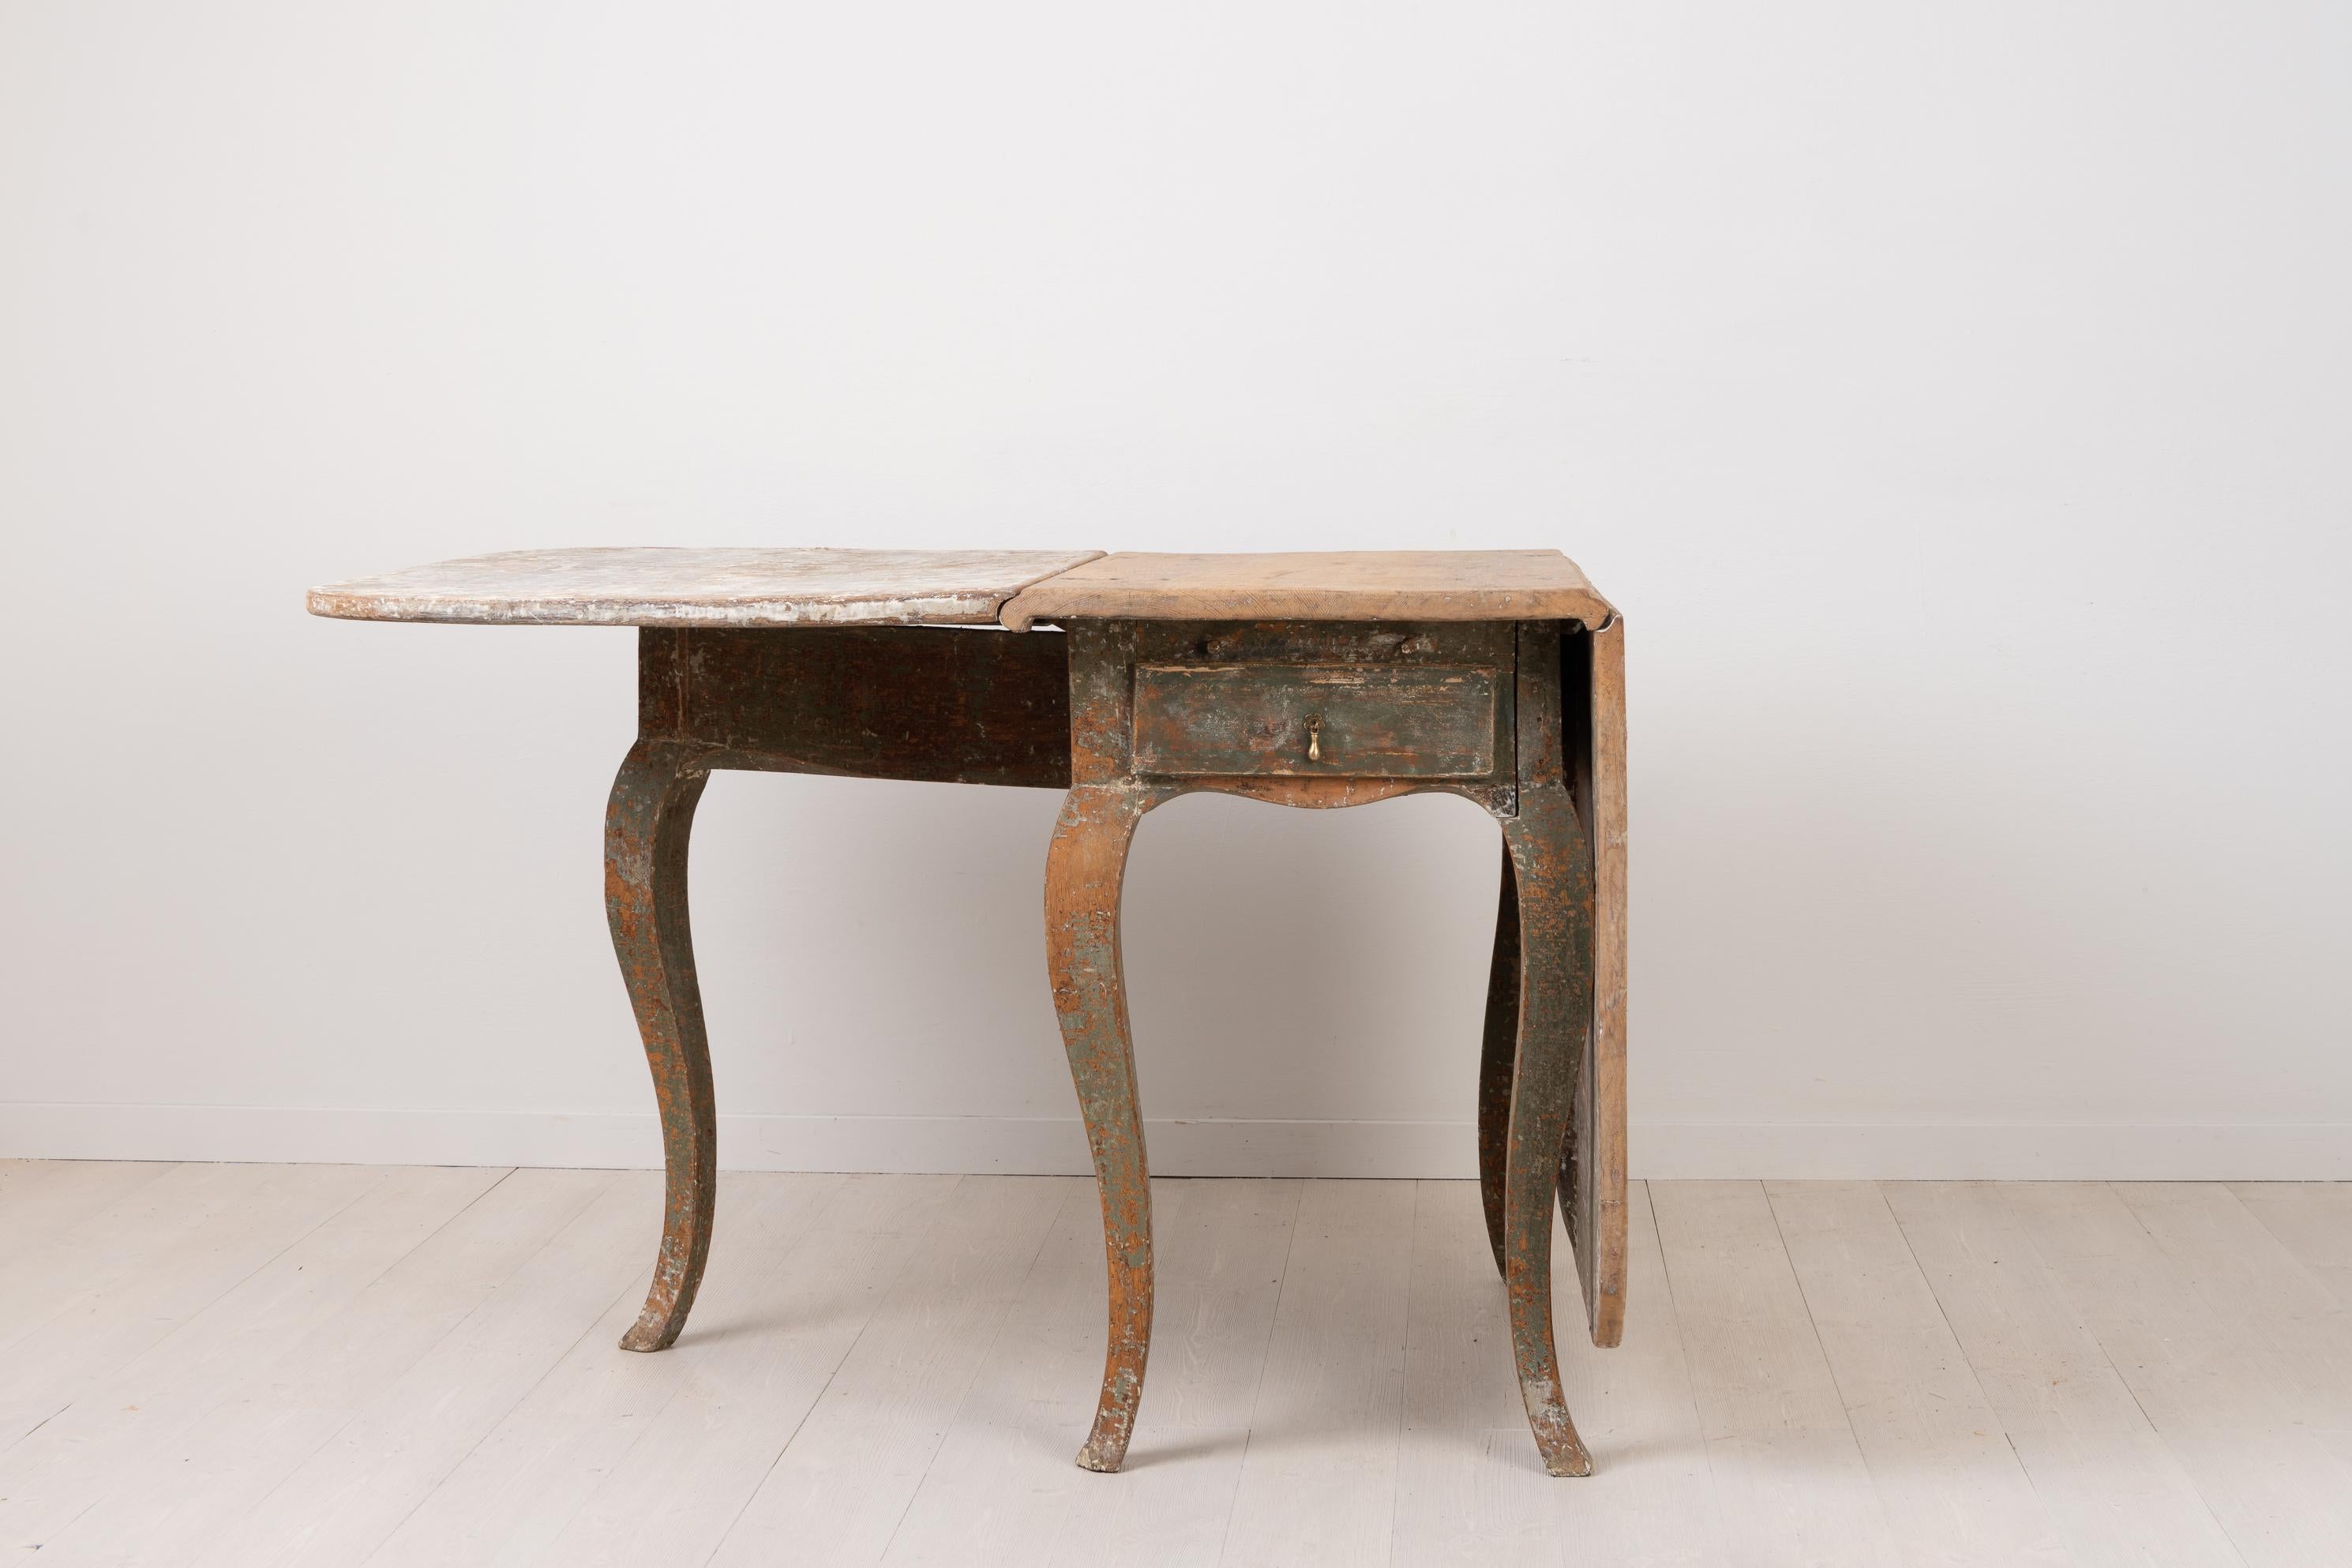 Hand-Crafted 18th Century Swedish Rococo Drop-Leaf Table